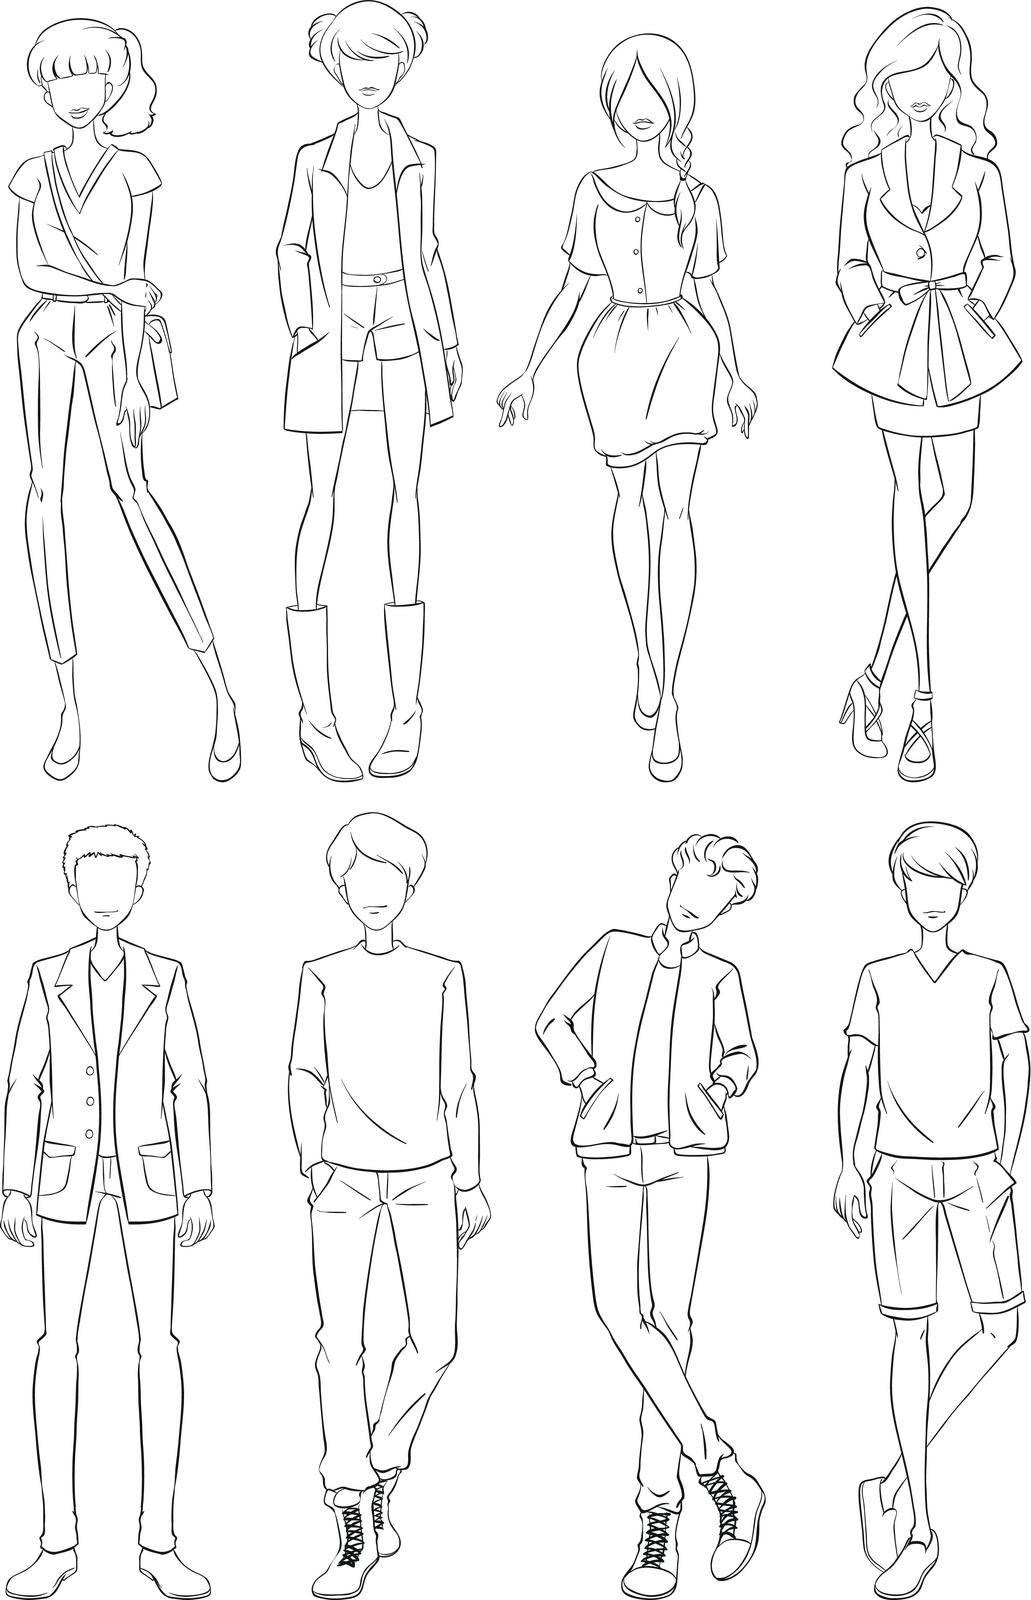 Eight different styles of clothing in simple line drawing